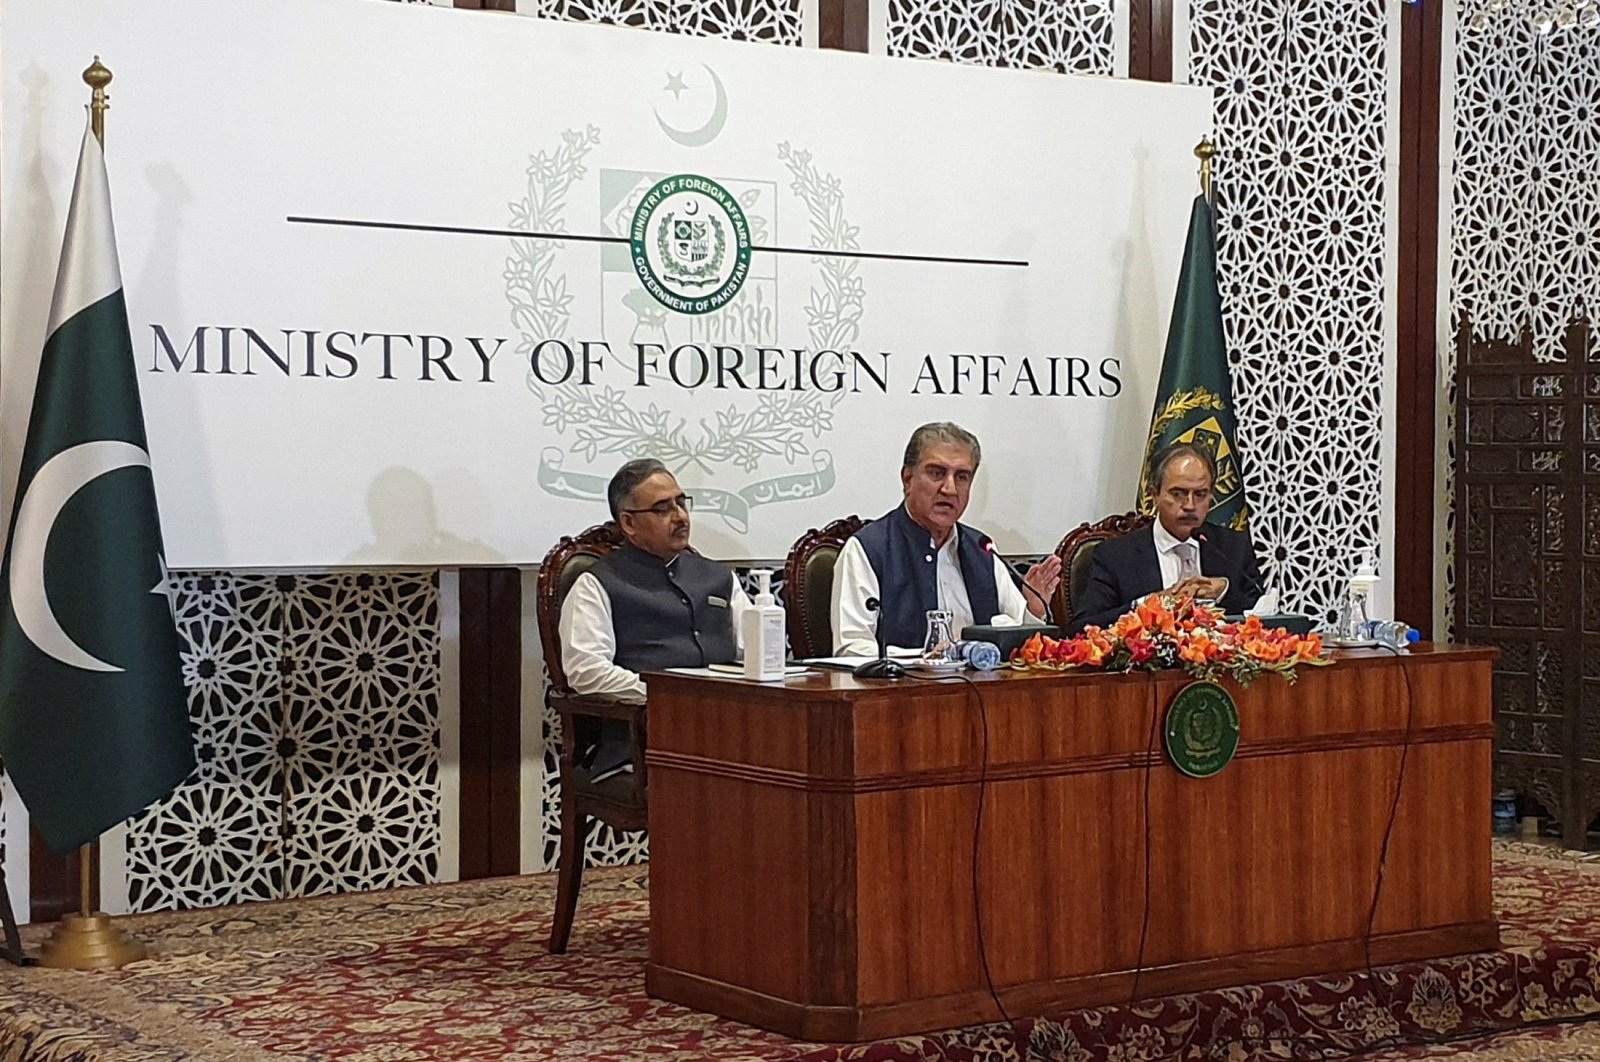 Pakistani Foreign Minister Shah Mahmood Qureshi (C) along with Foreign Secretary Sohail Mahmood  (R) and Foreign Office spokesperson Asim Iftikhar speak during a news conference in Islamabad, Pakistan, Oct. 21, 2021. (Reuters Photo)